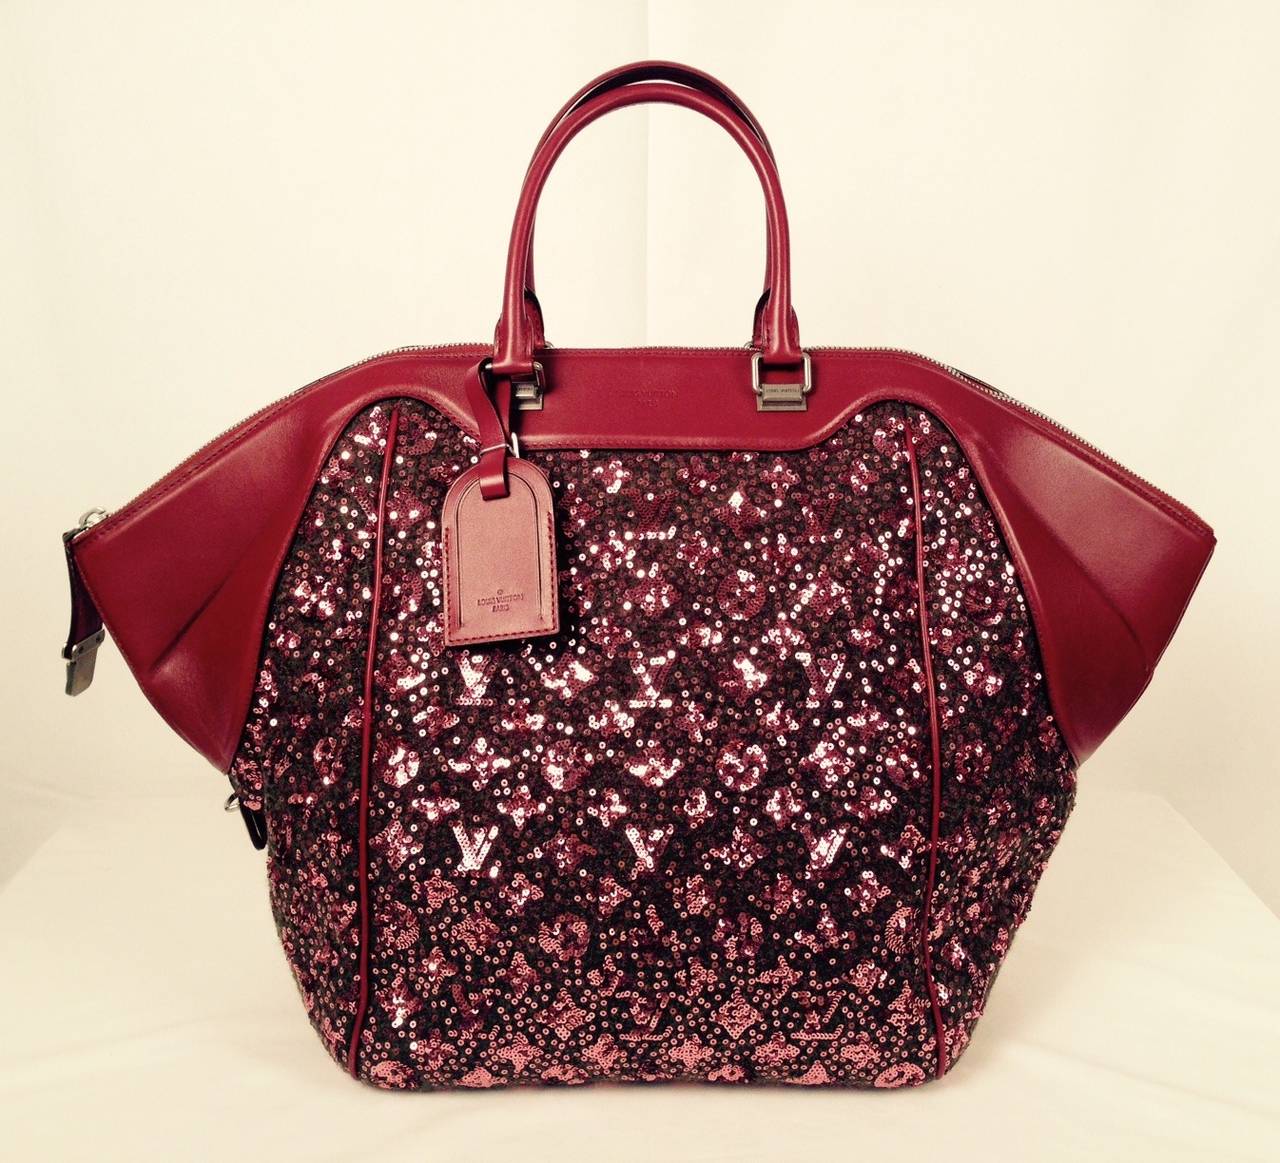 Louis Vuitton Sequin Monogram Sunshine Express North South in Burgundy graced the Fall 2012 runway in Paris! Never used, this wool tote is entirely covered in sequins that actually create the world famous Louis Vuitton monogram. The bag features